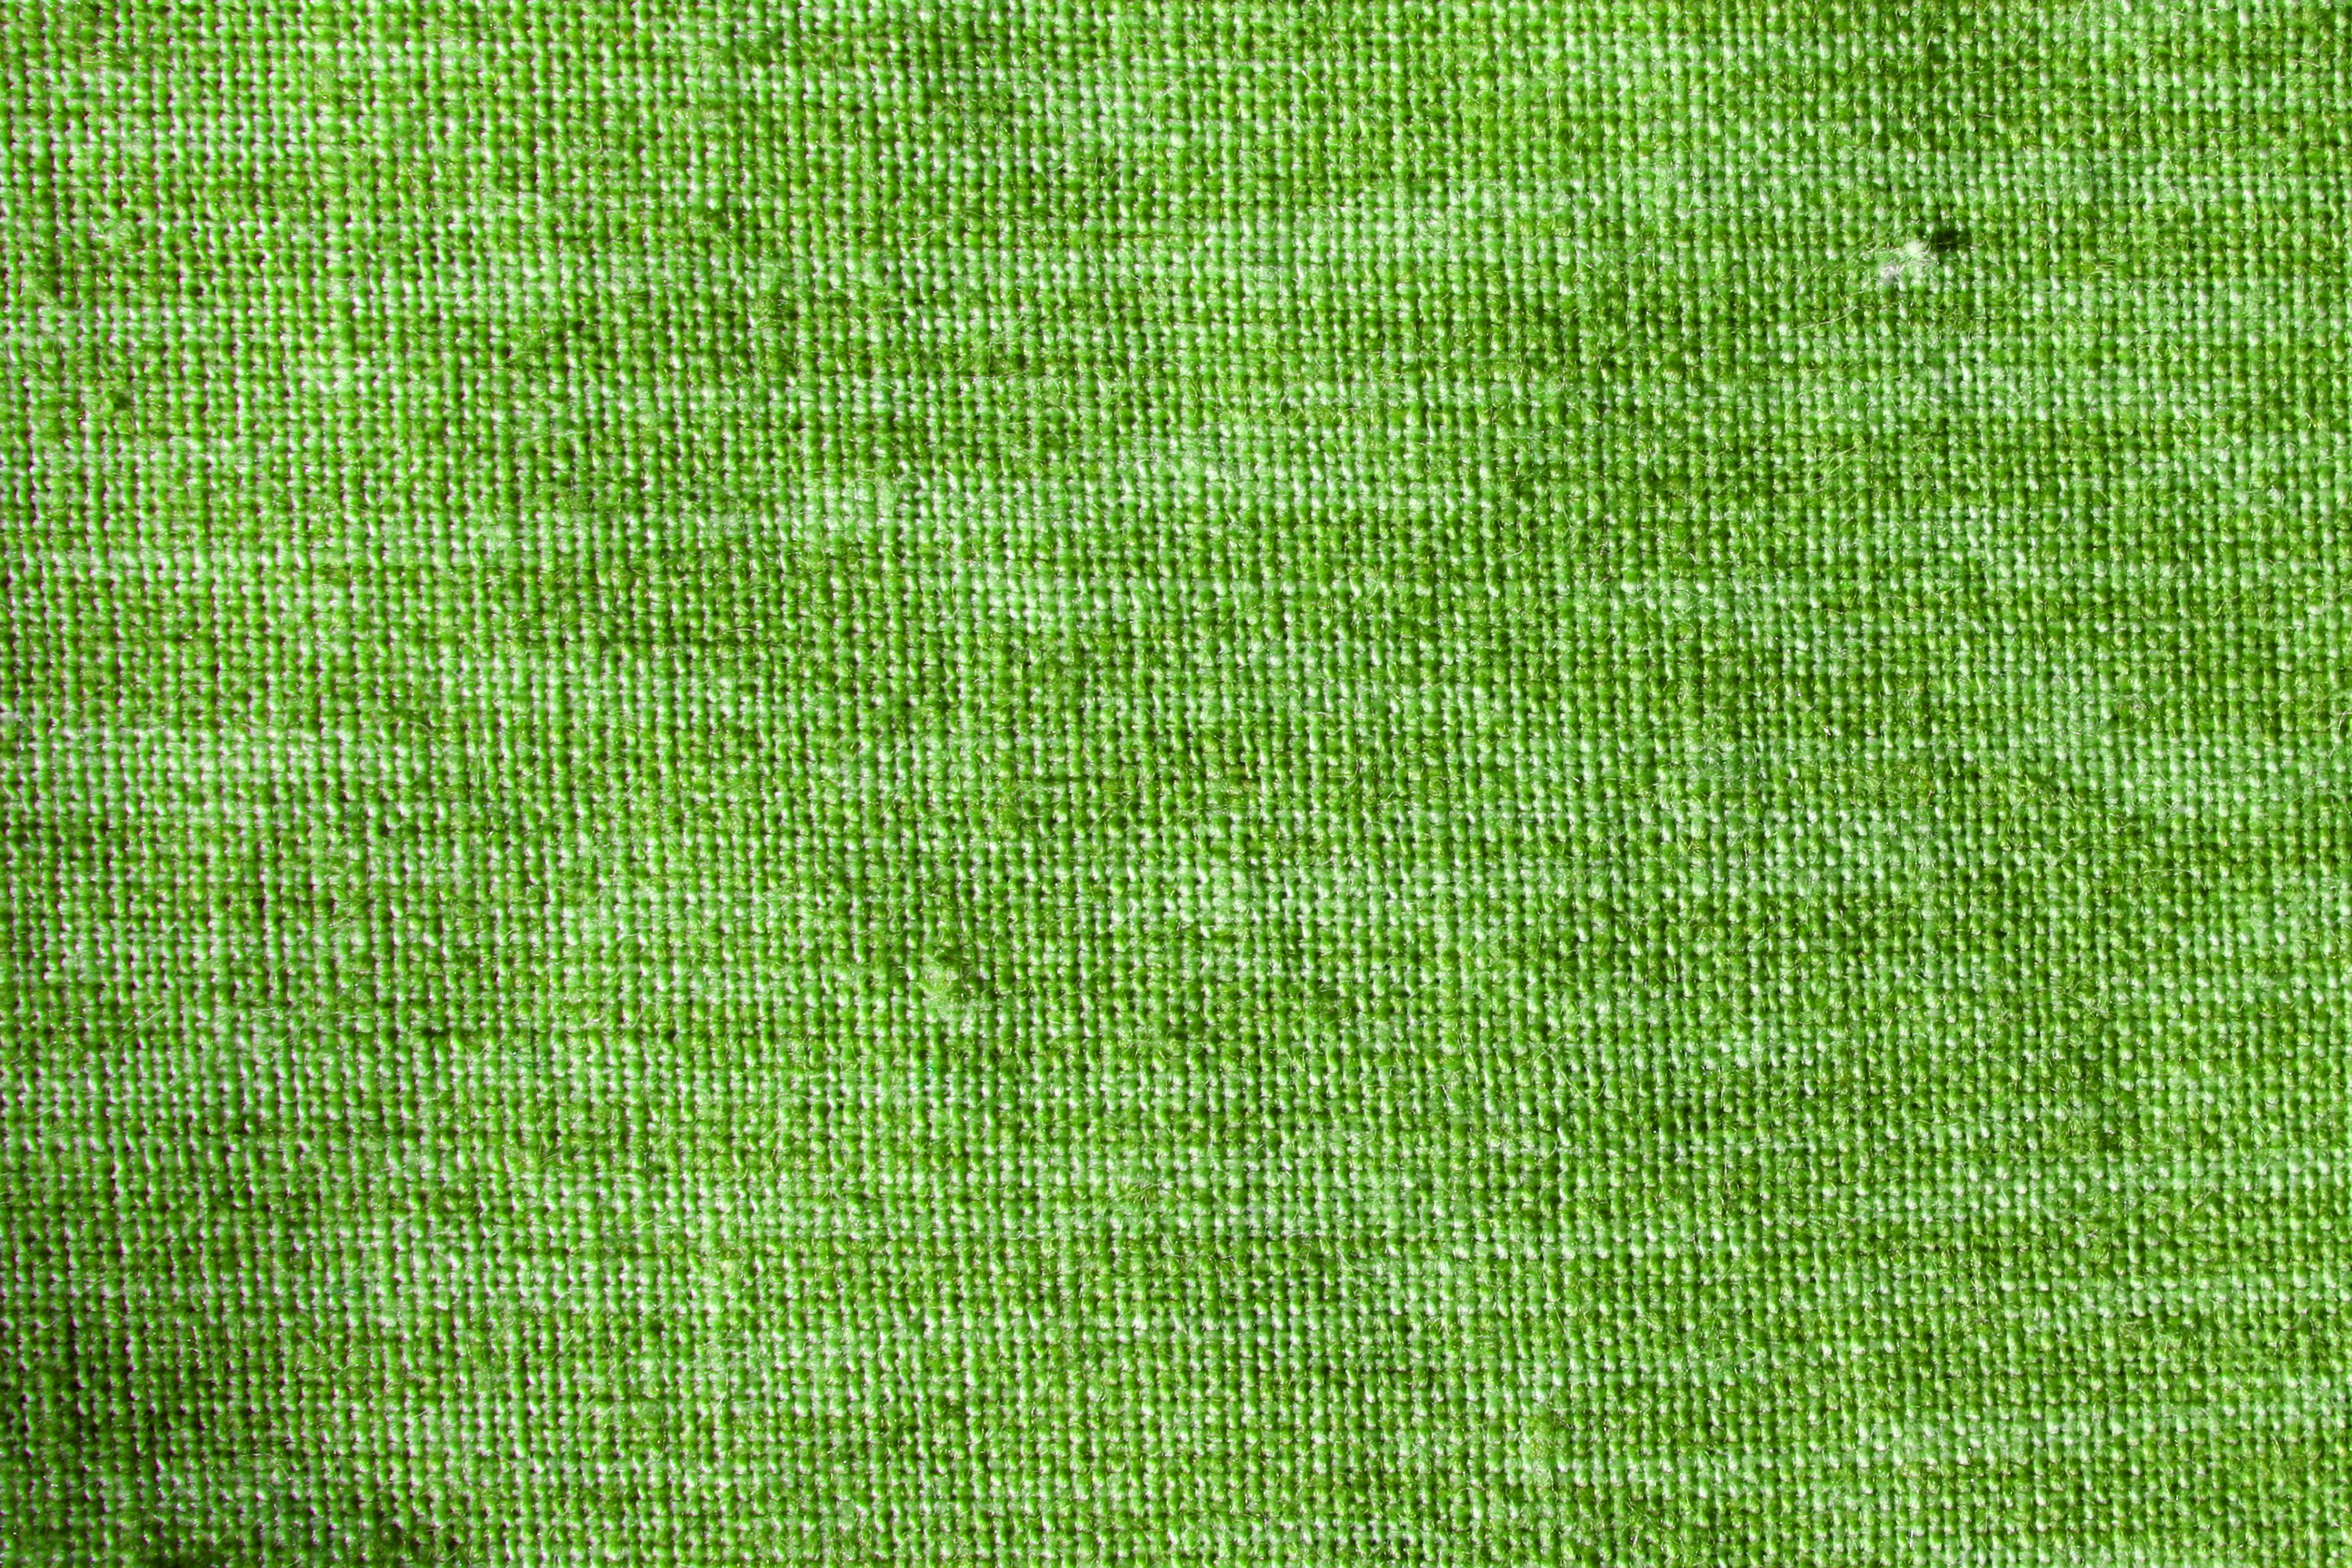 Lime Green Woven Fabric Close Up Texture Picture | Free Photograph ...